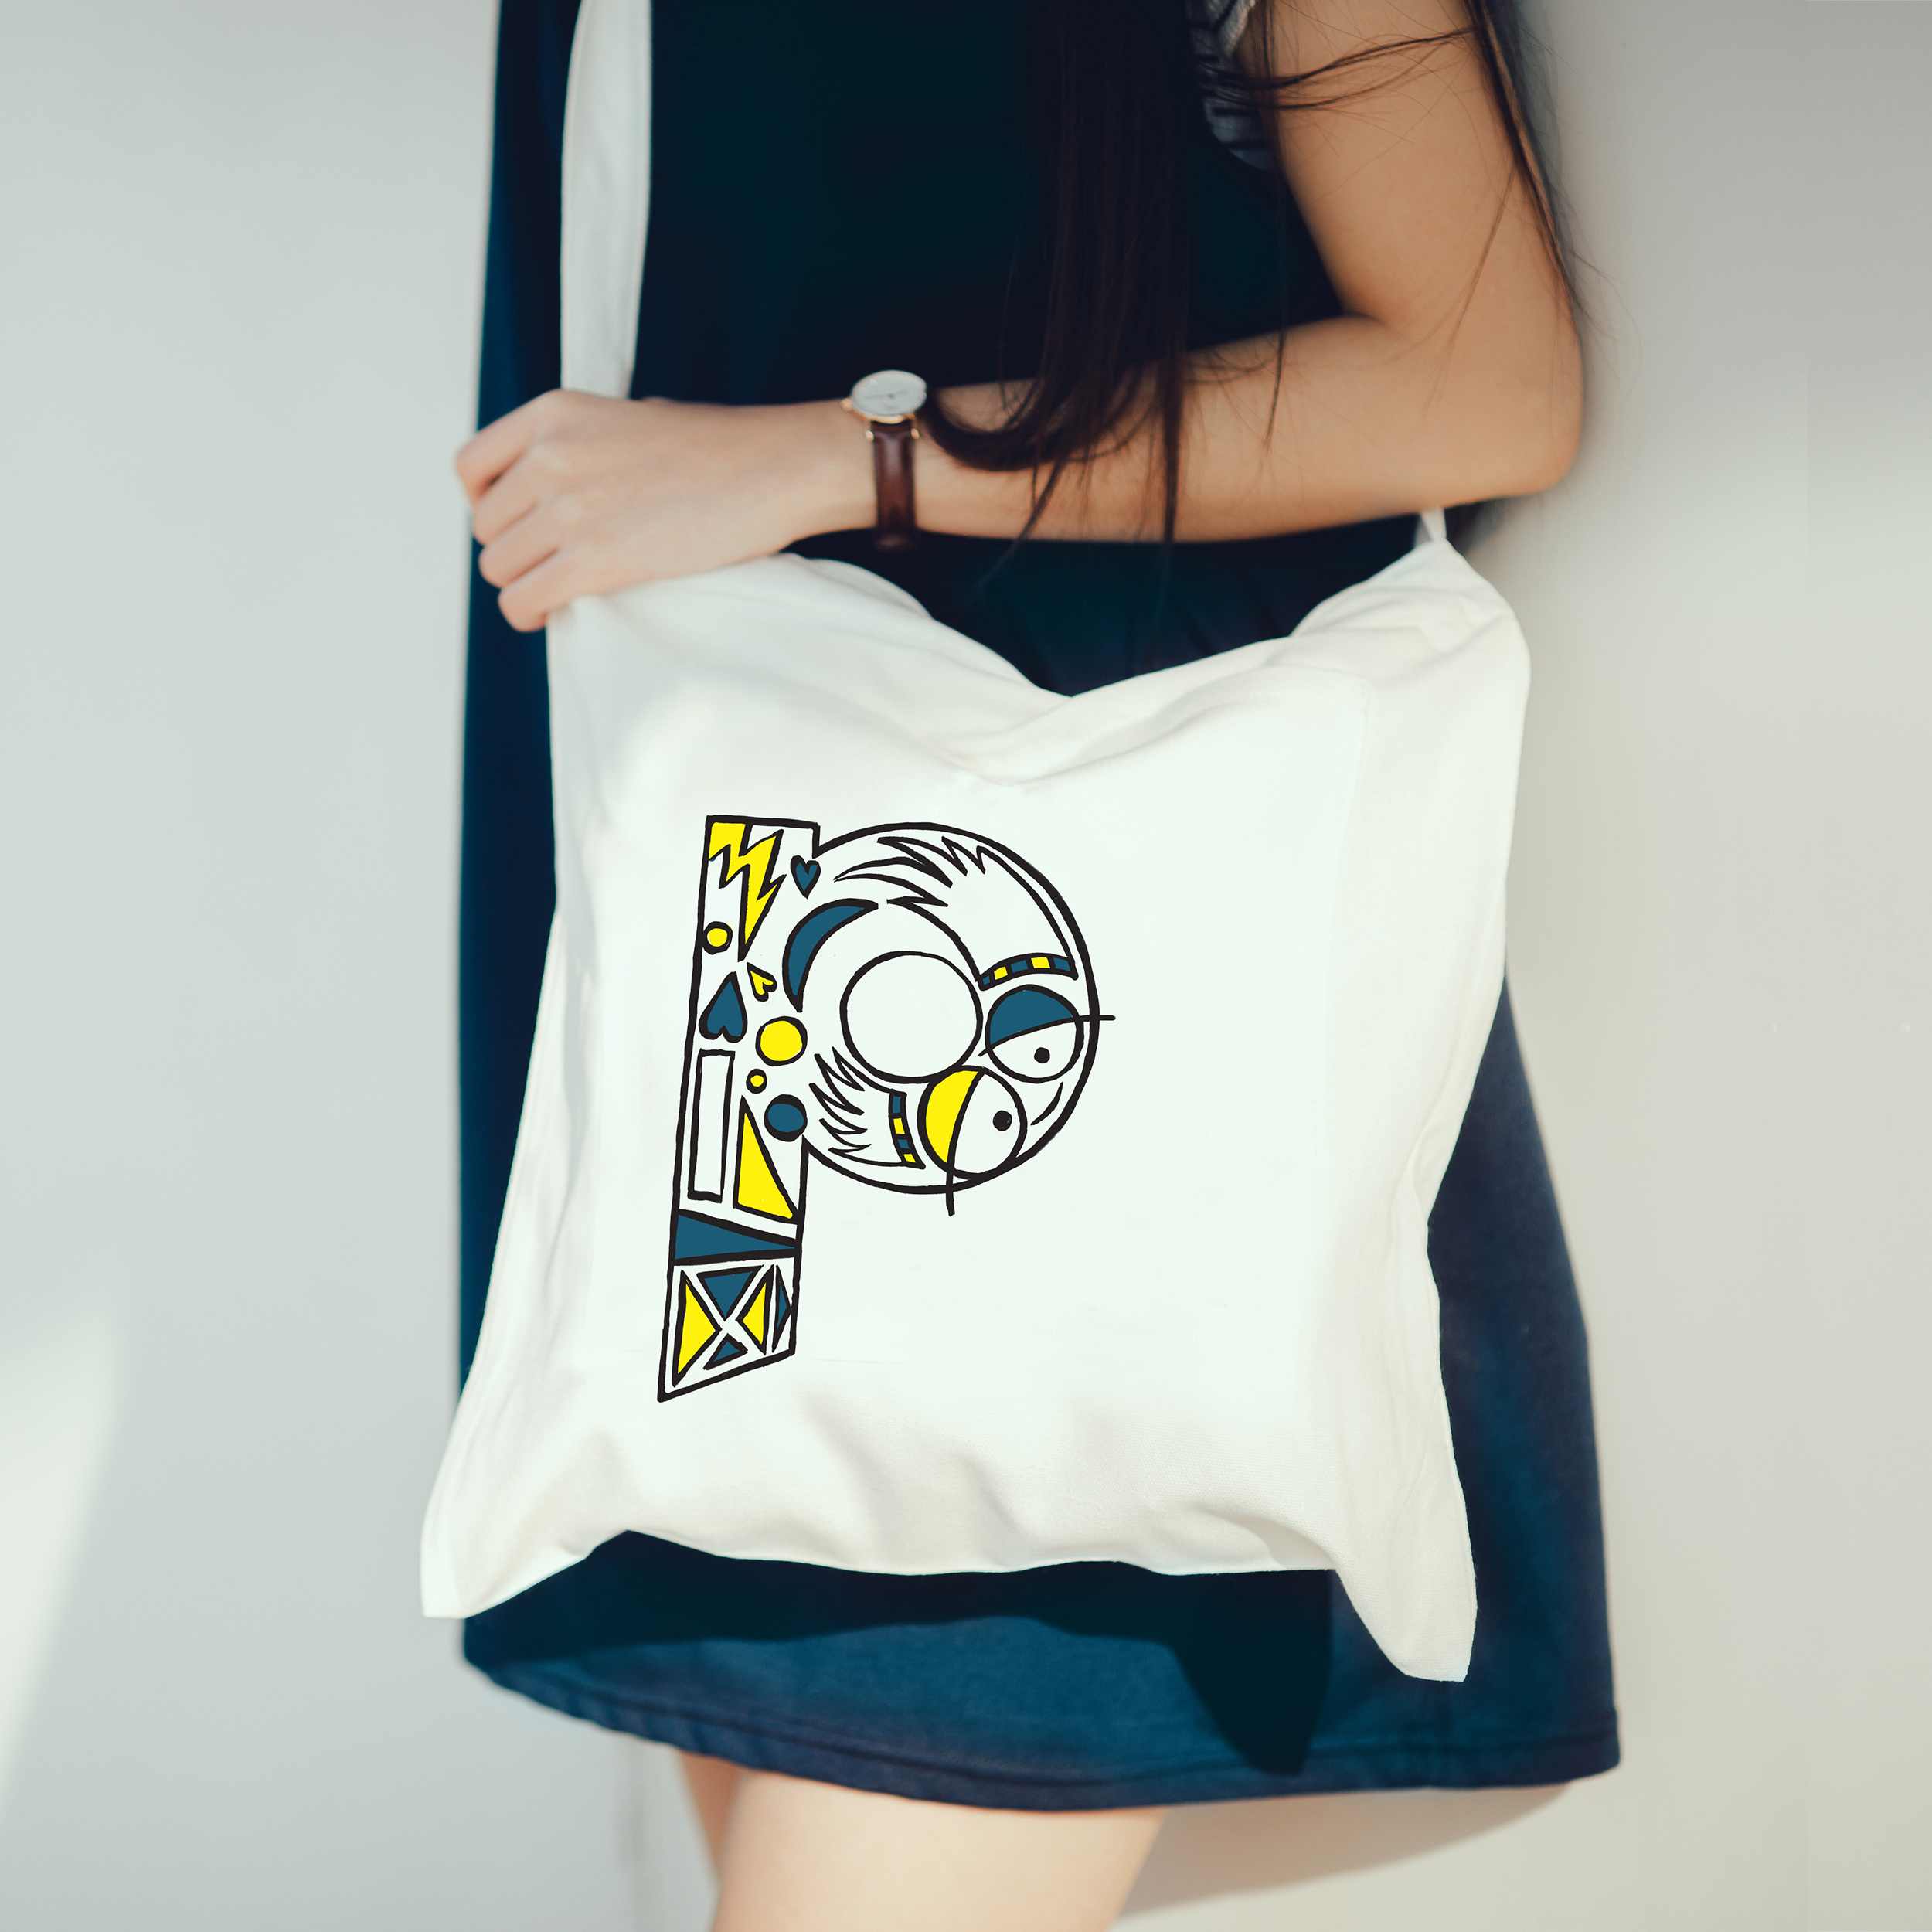 Typo collection - t-shirts & bags 9